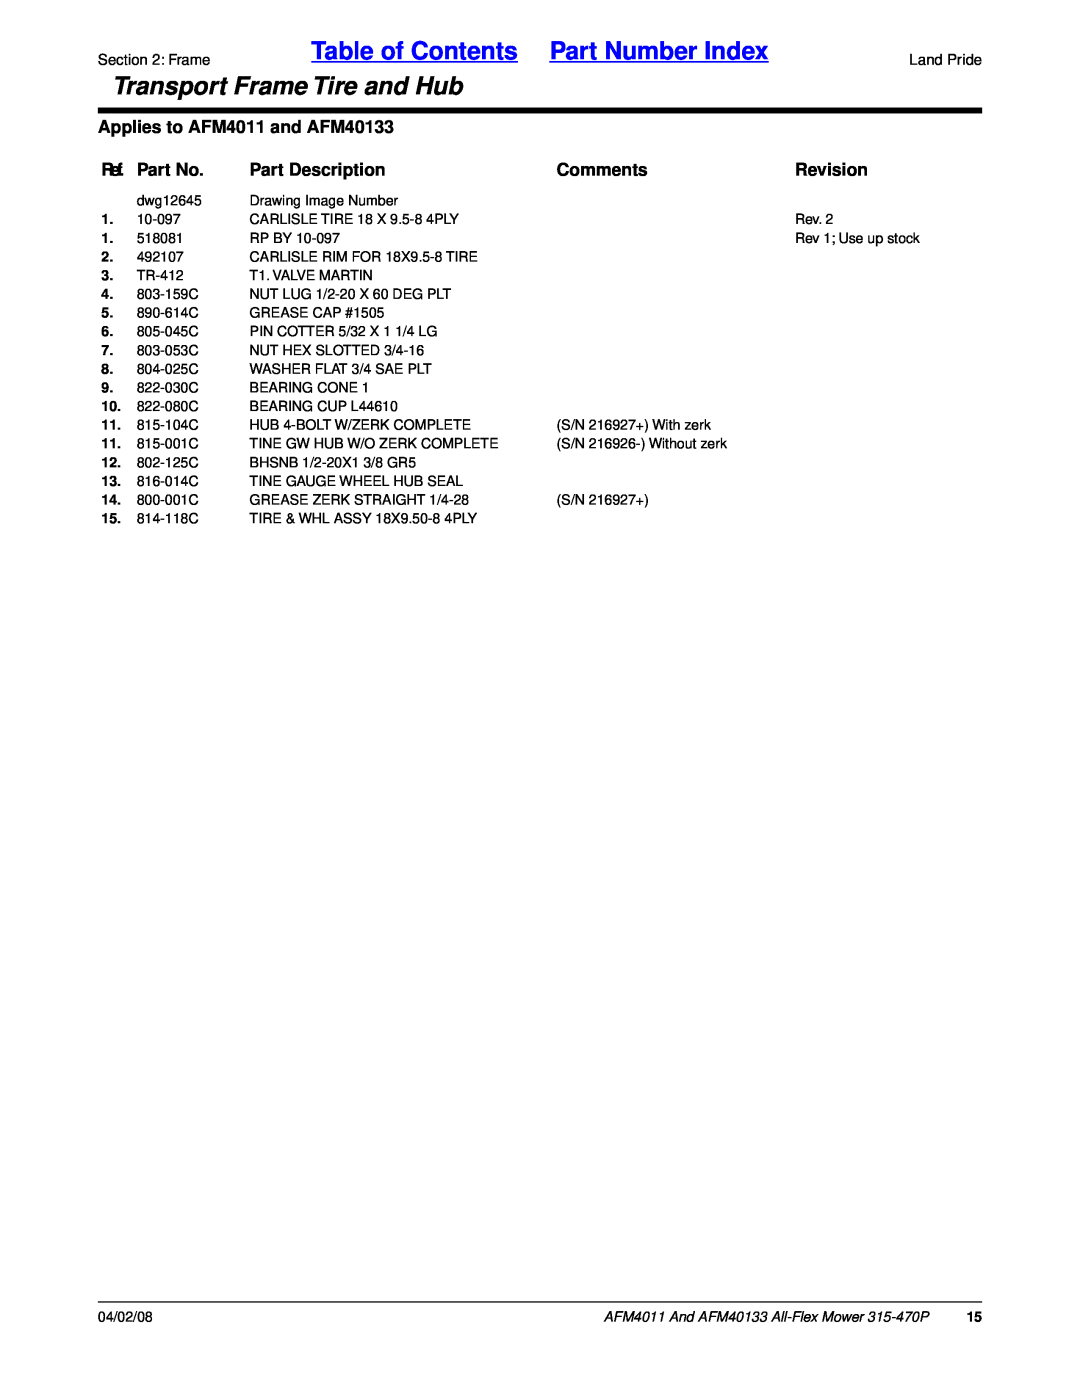 Land Pride Table of Contents Part Number Index, Transport Frame Tire and Hub, Applies to AFM4011 and AFM40133, Comments 